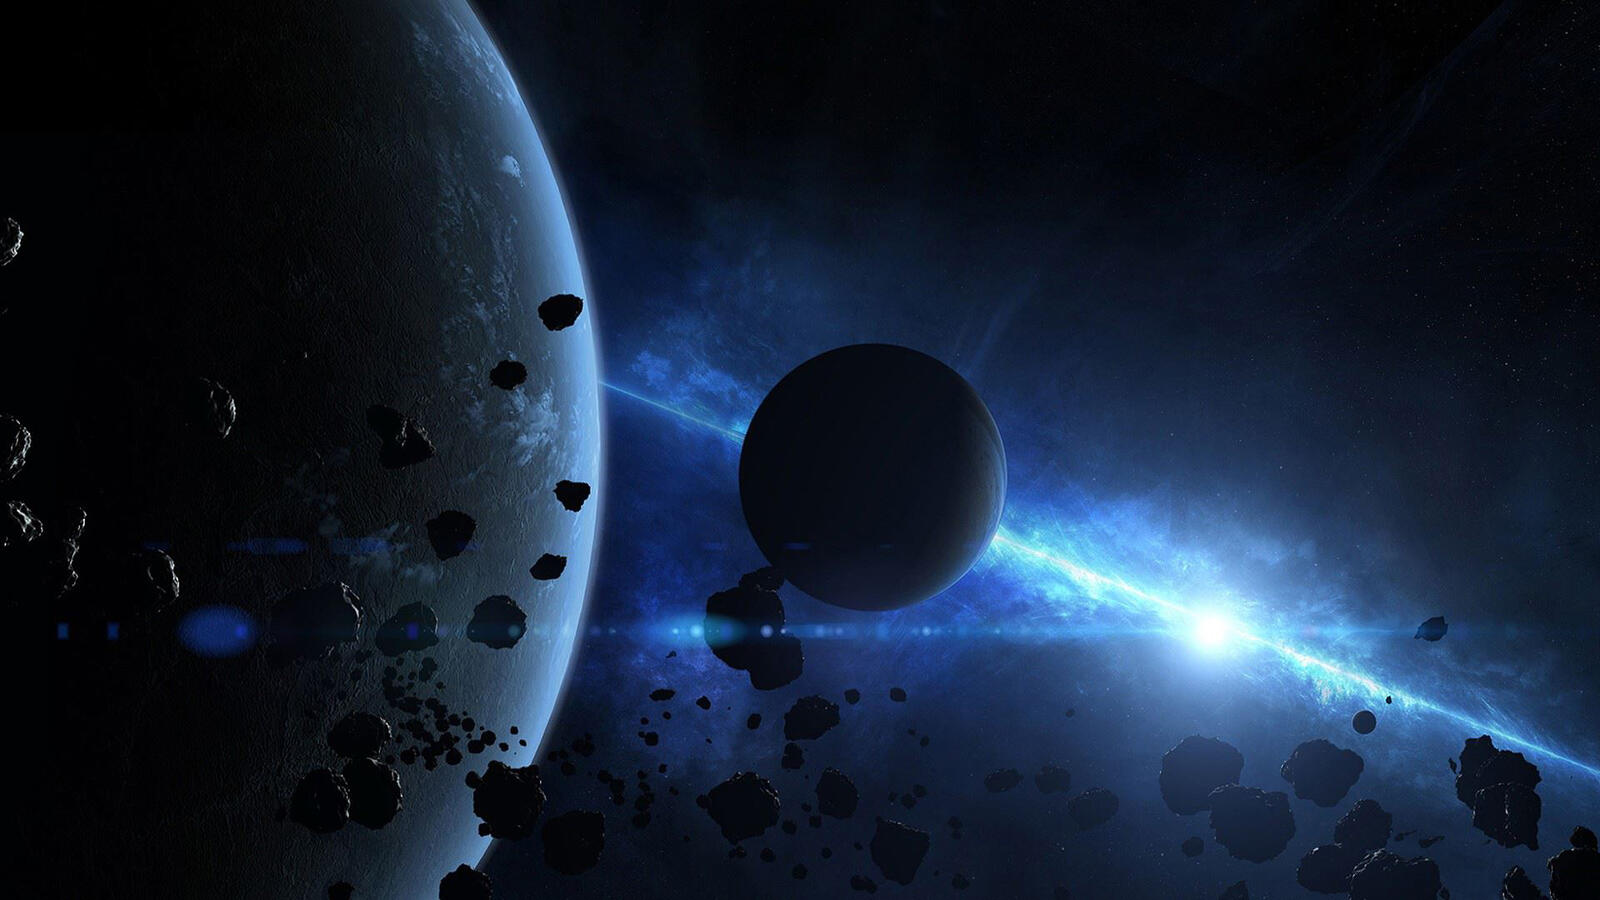 Wallpapers Planet and a small satellite meteorites a star on the desktop